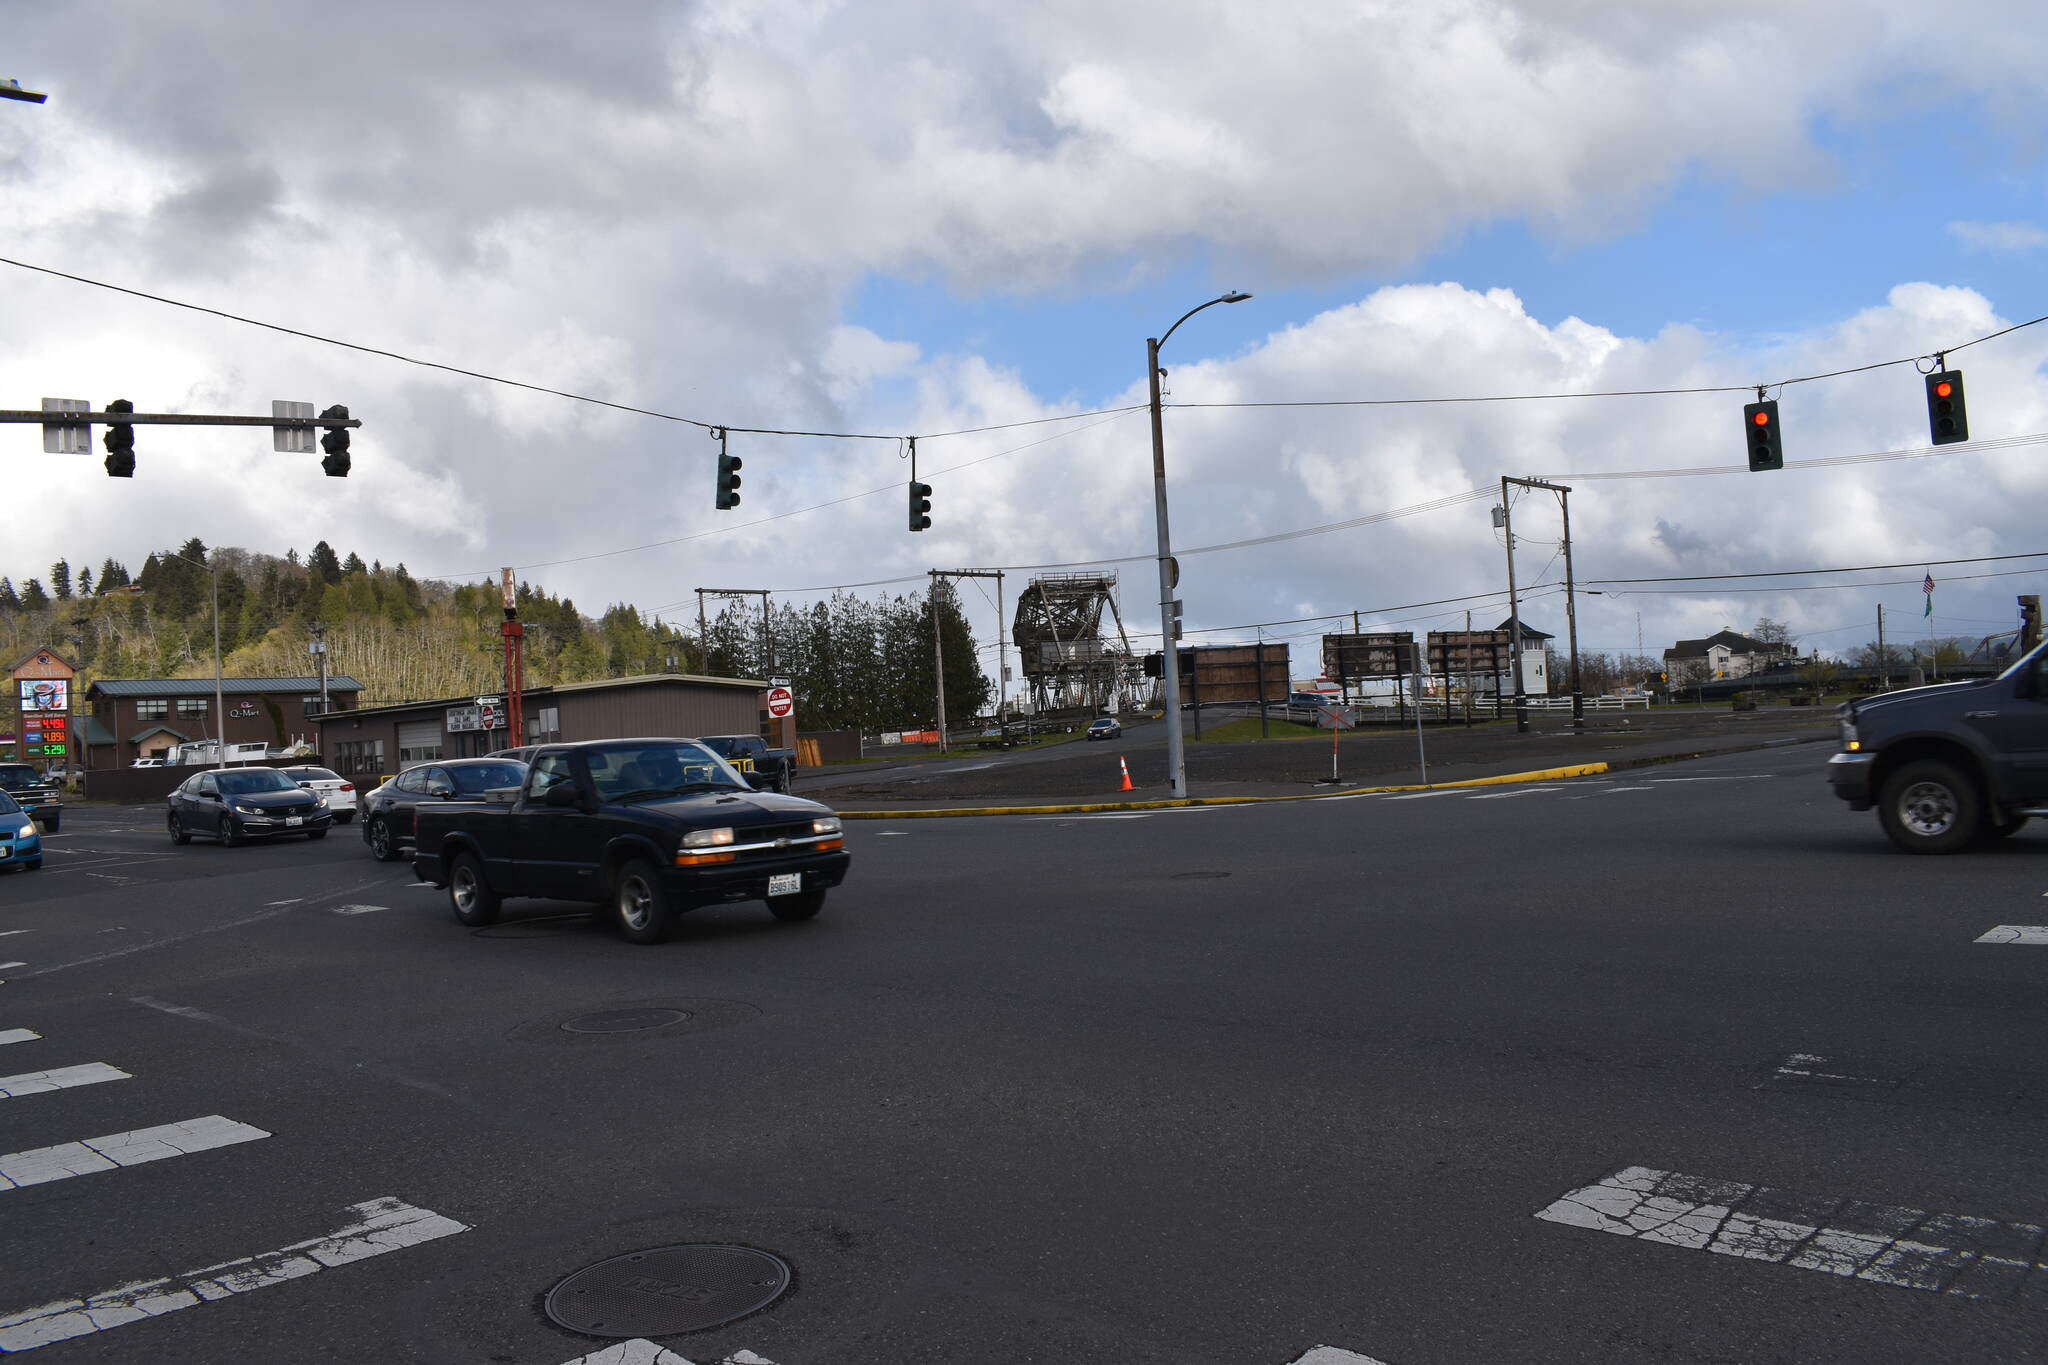 The five-way intersection, which allows traffic to flow from Fuller Way, East Market Street, and F Street, will start to be replaced on Monday, April 18, with a roundabout, which is supposed to add to safety and traffic efficiency in the area. There is some local concern about the project’s affect on business. Matthew N. Wells | The Daily World